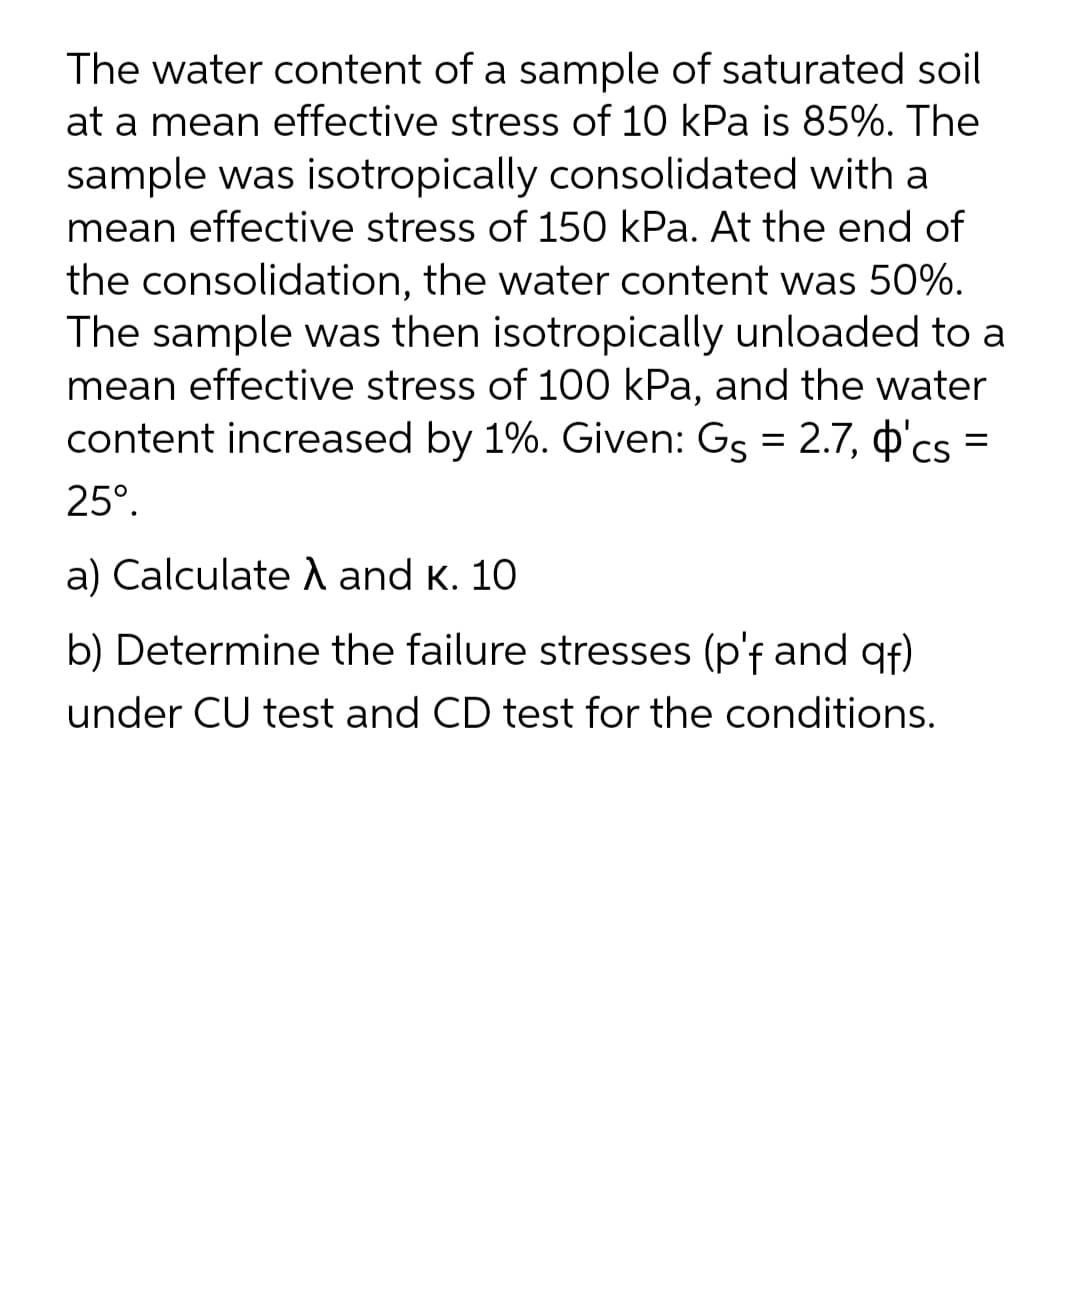 The water content of a sample of saturated soil
at a mean effective stress of 10 kPa is 85%. The
sample was isotropically consolidated with a
mean effective stress of 150 kPa. At the end of
the consolidation, the water content was 50%.
The sample was then isotropically unloaded to a
mean effective stress of 100 kPa, and the water
content increased by 1%. Given: Gs = 2.7, o'cs =
25°.
a) Calculate and K. 10
b) Determine the failure stresses (p'f and gf)
under CU test and CD test for the conditions.
